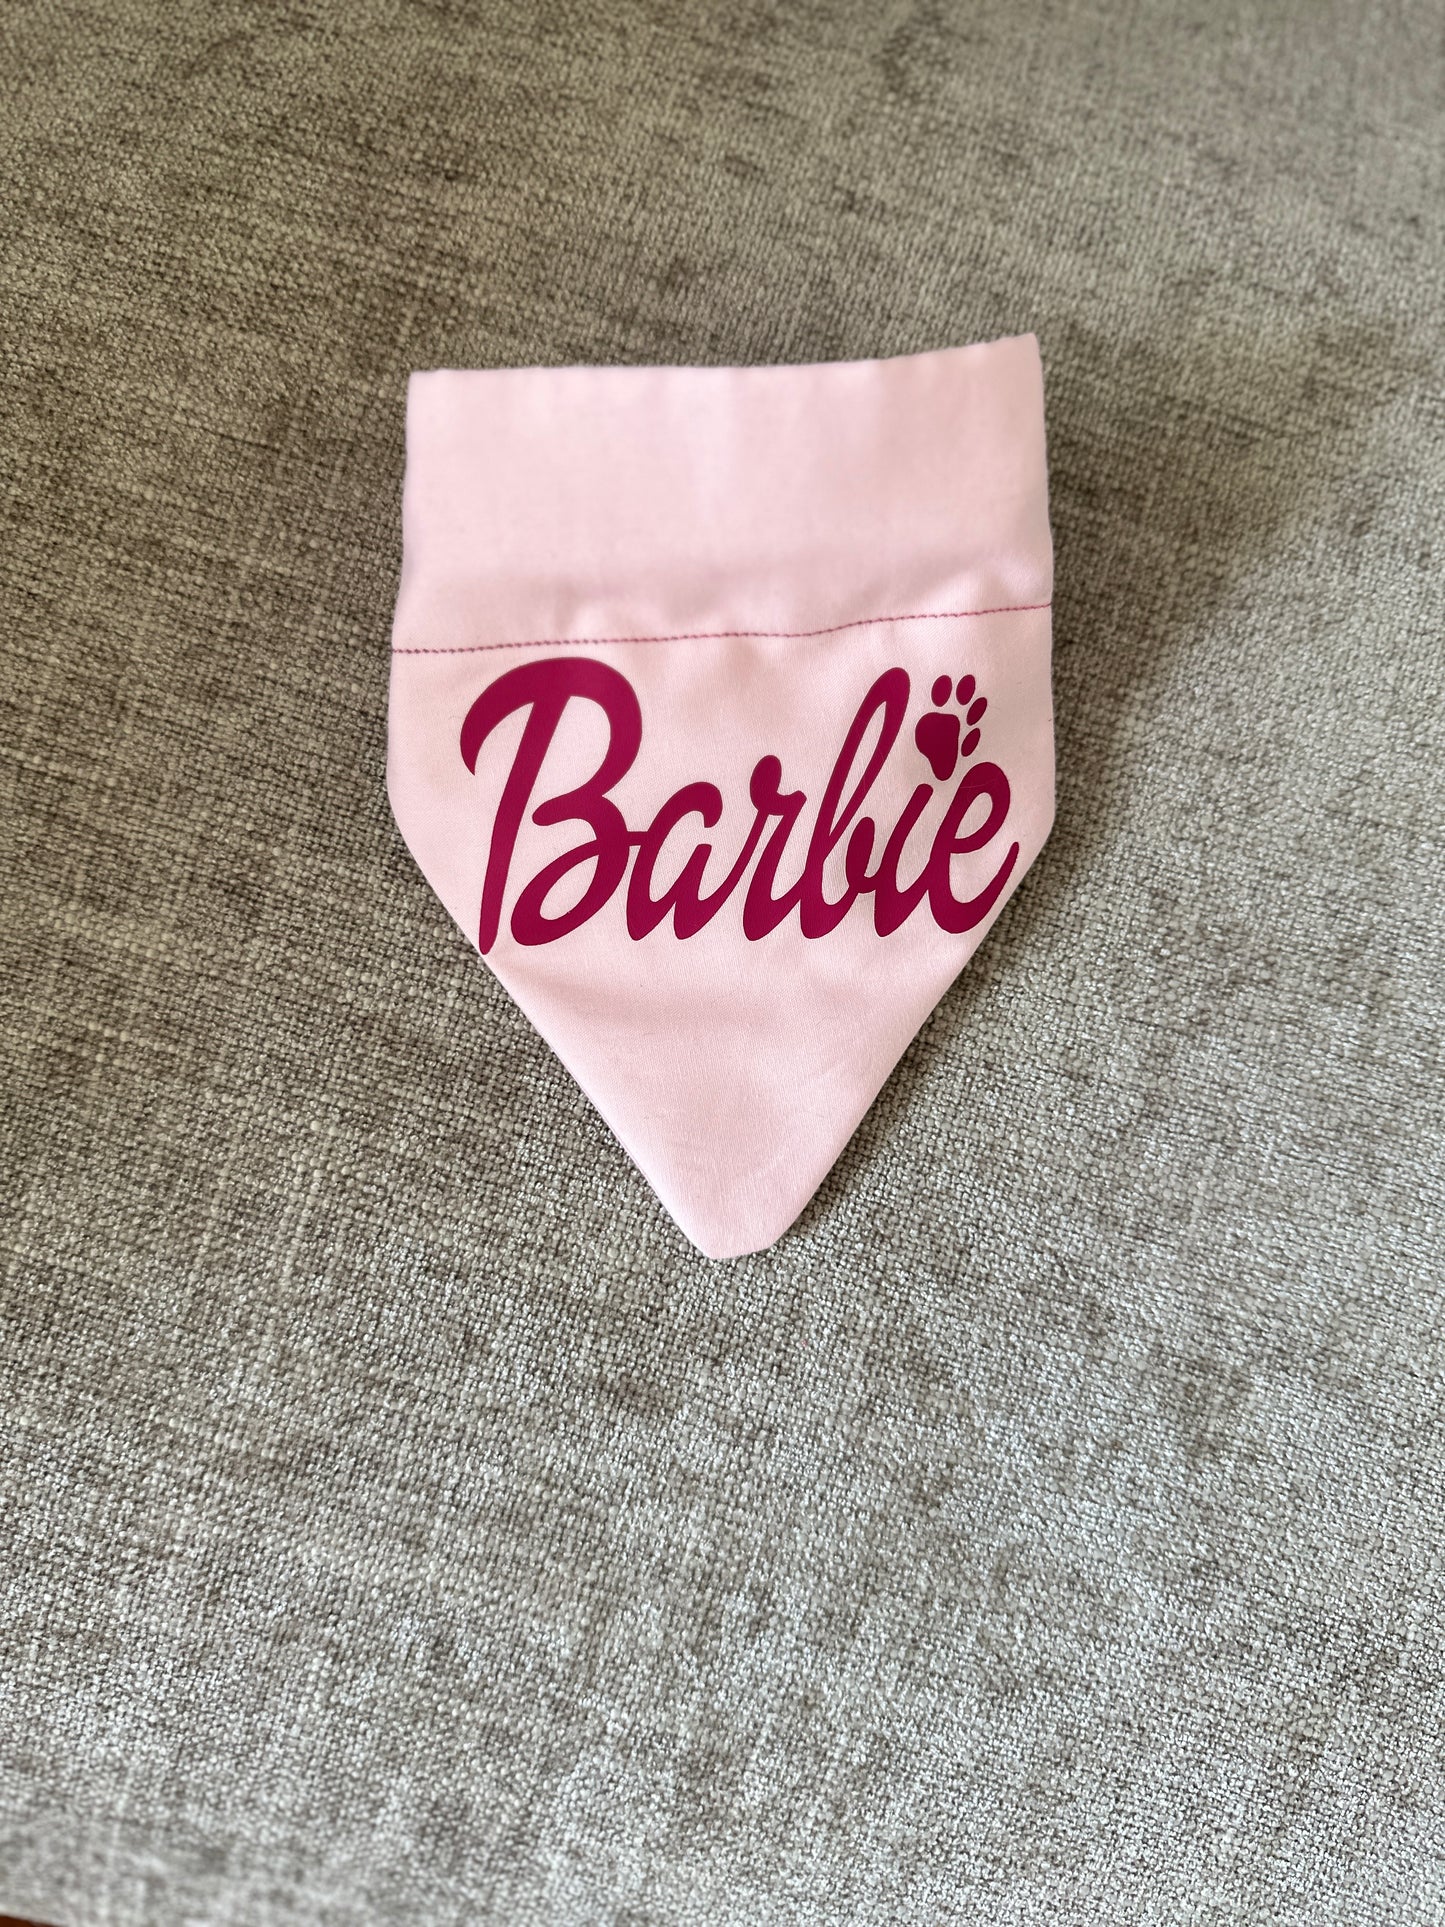 Barbie Collection for Pampered Pets